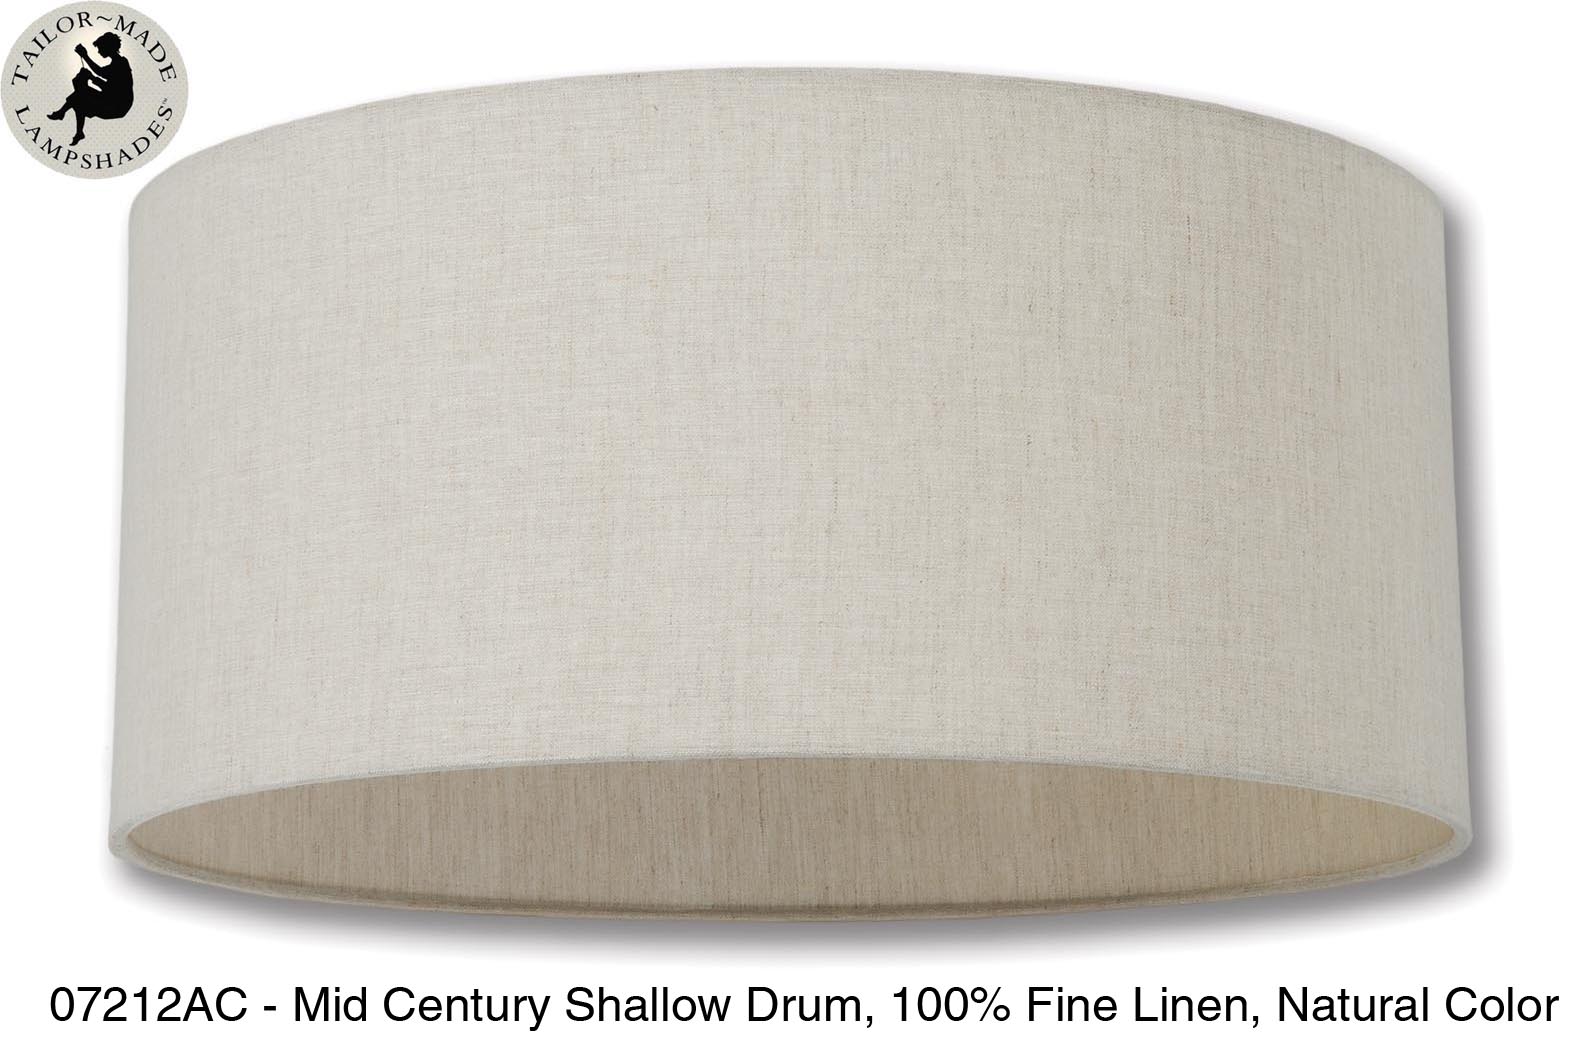 Mid Century Shallow Drum Lamp Shades - Natural Color, 100% Fine Linen